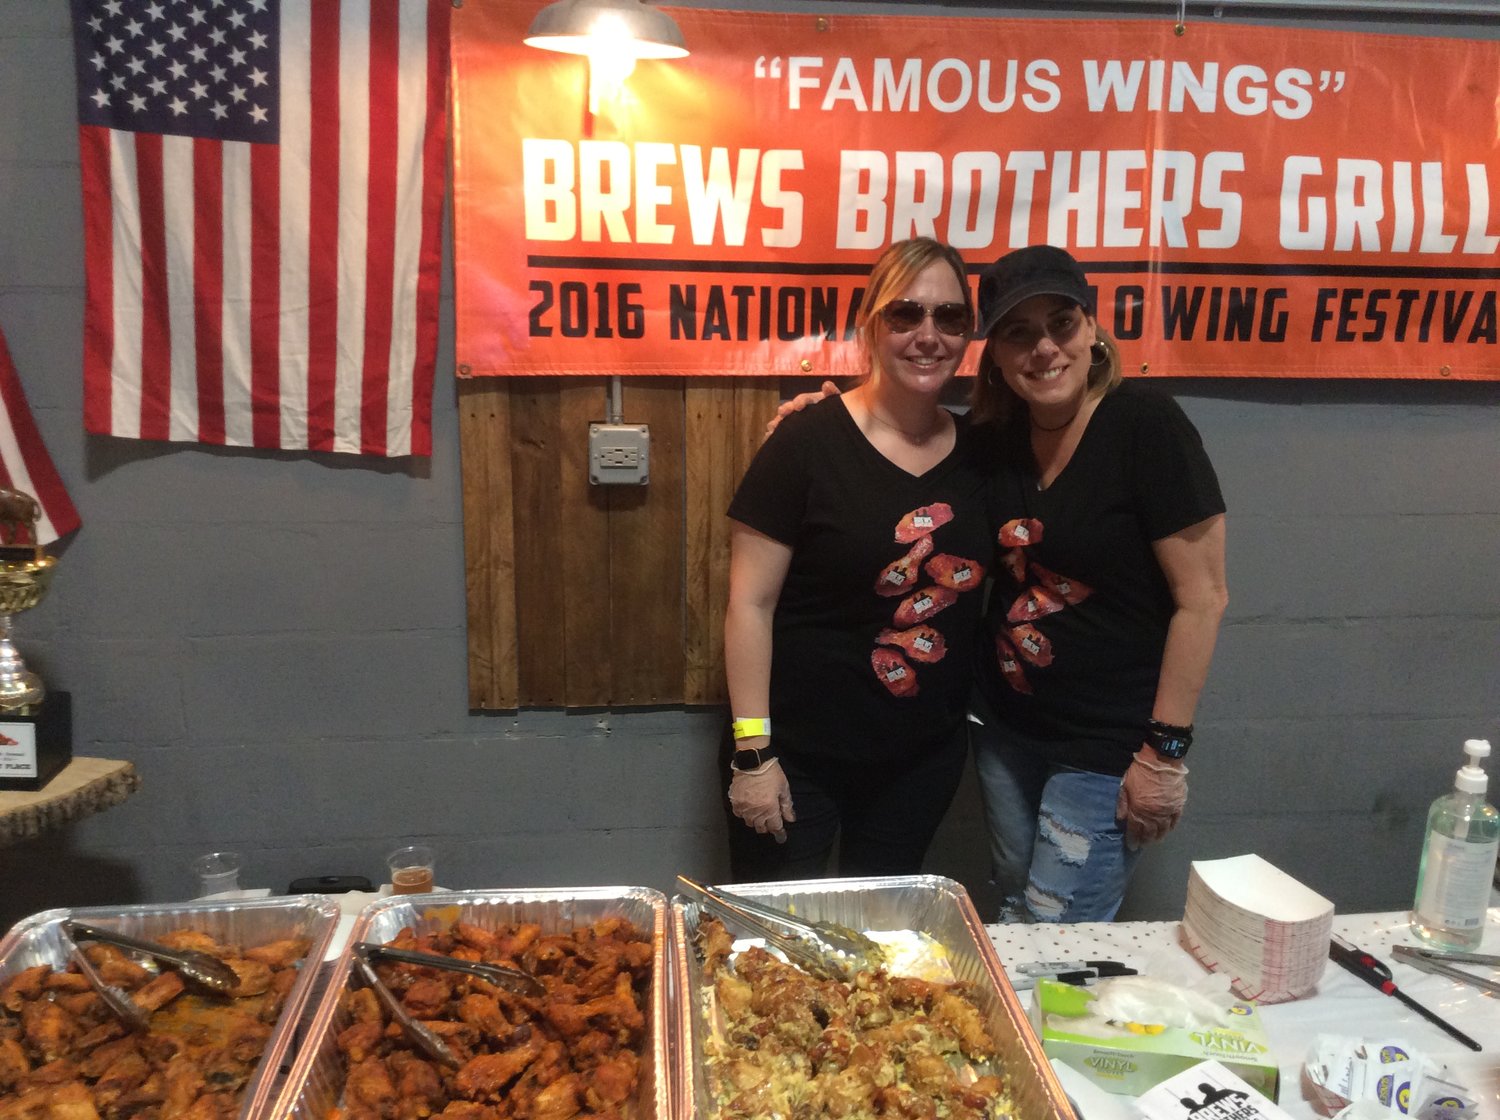 Restaurants and wing fans came from across the Island for the NY Best Wings Fest.